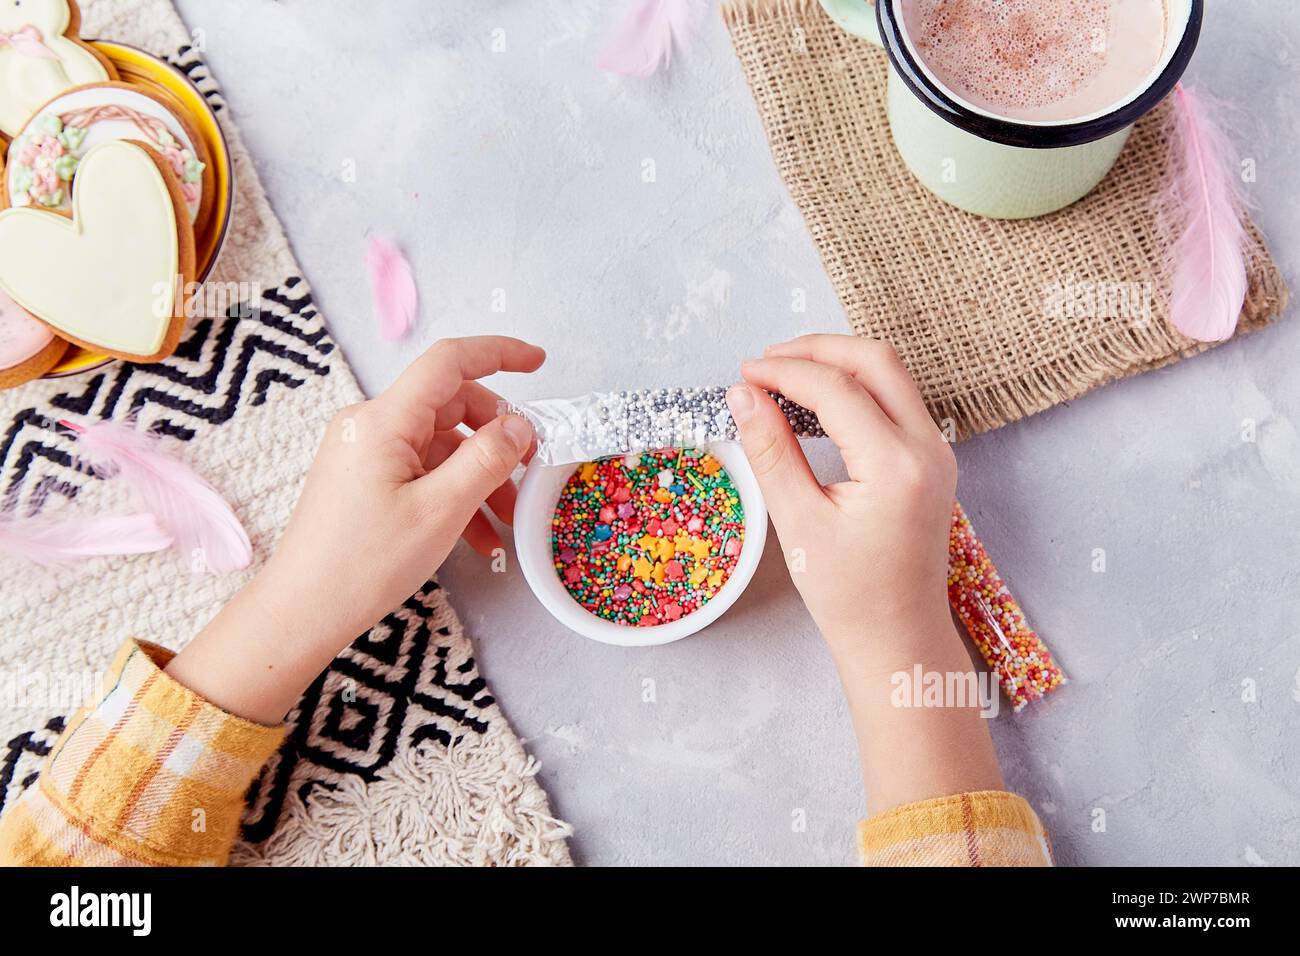 Easter joy with decorated cookies with sprinkles by child hands among sweet cocoa and pastel cookies. Stock Photo